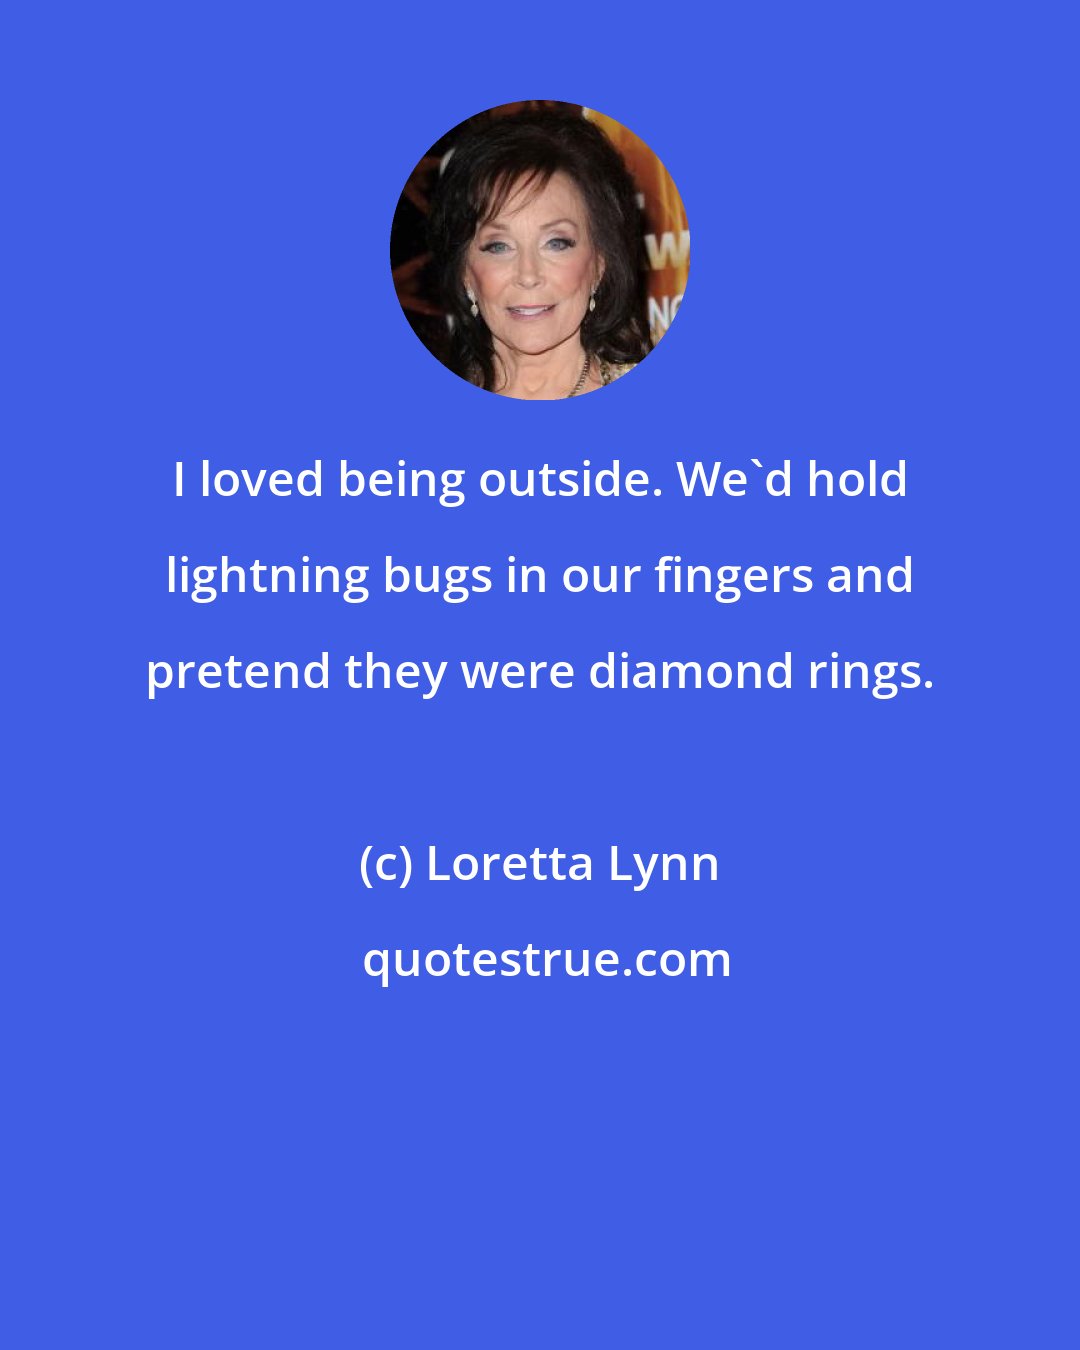 Loretta Lynn: I loved being outside. We'd hold lightning bugs in our fingers and pretend they were diamond rings.